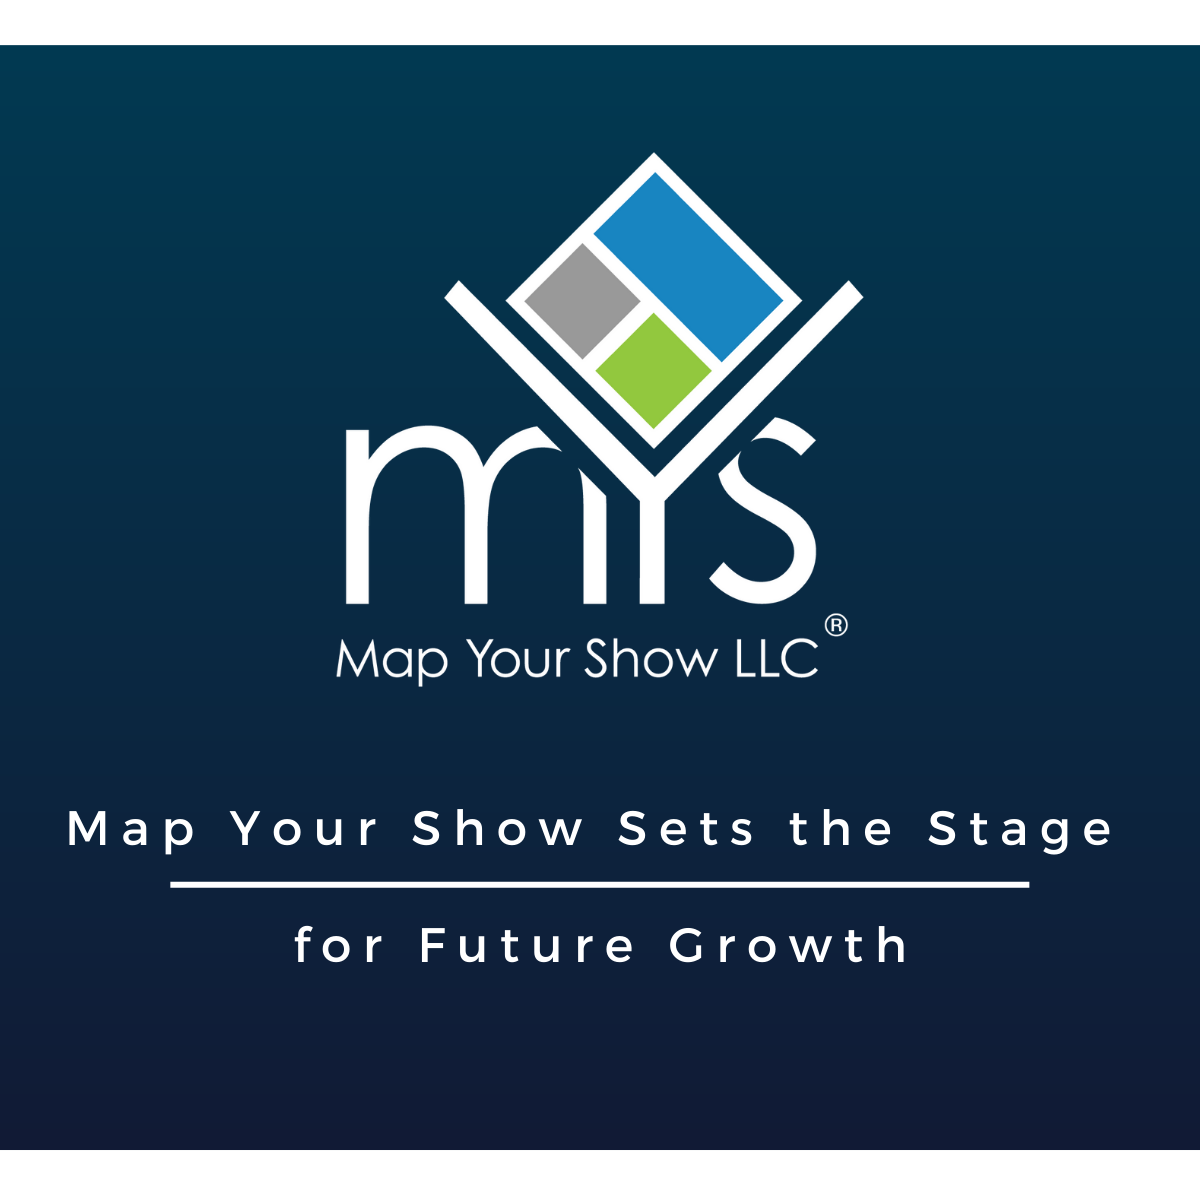 Map Your Show Sets the Stage for Future Growth